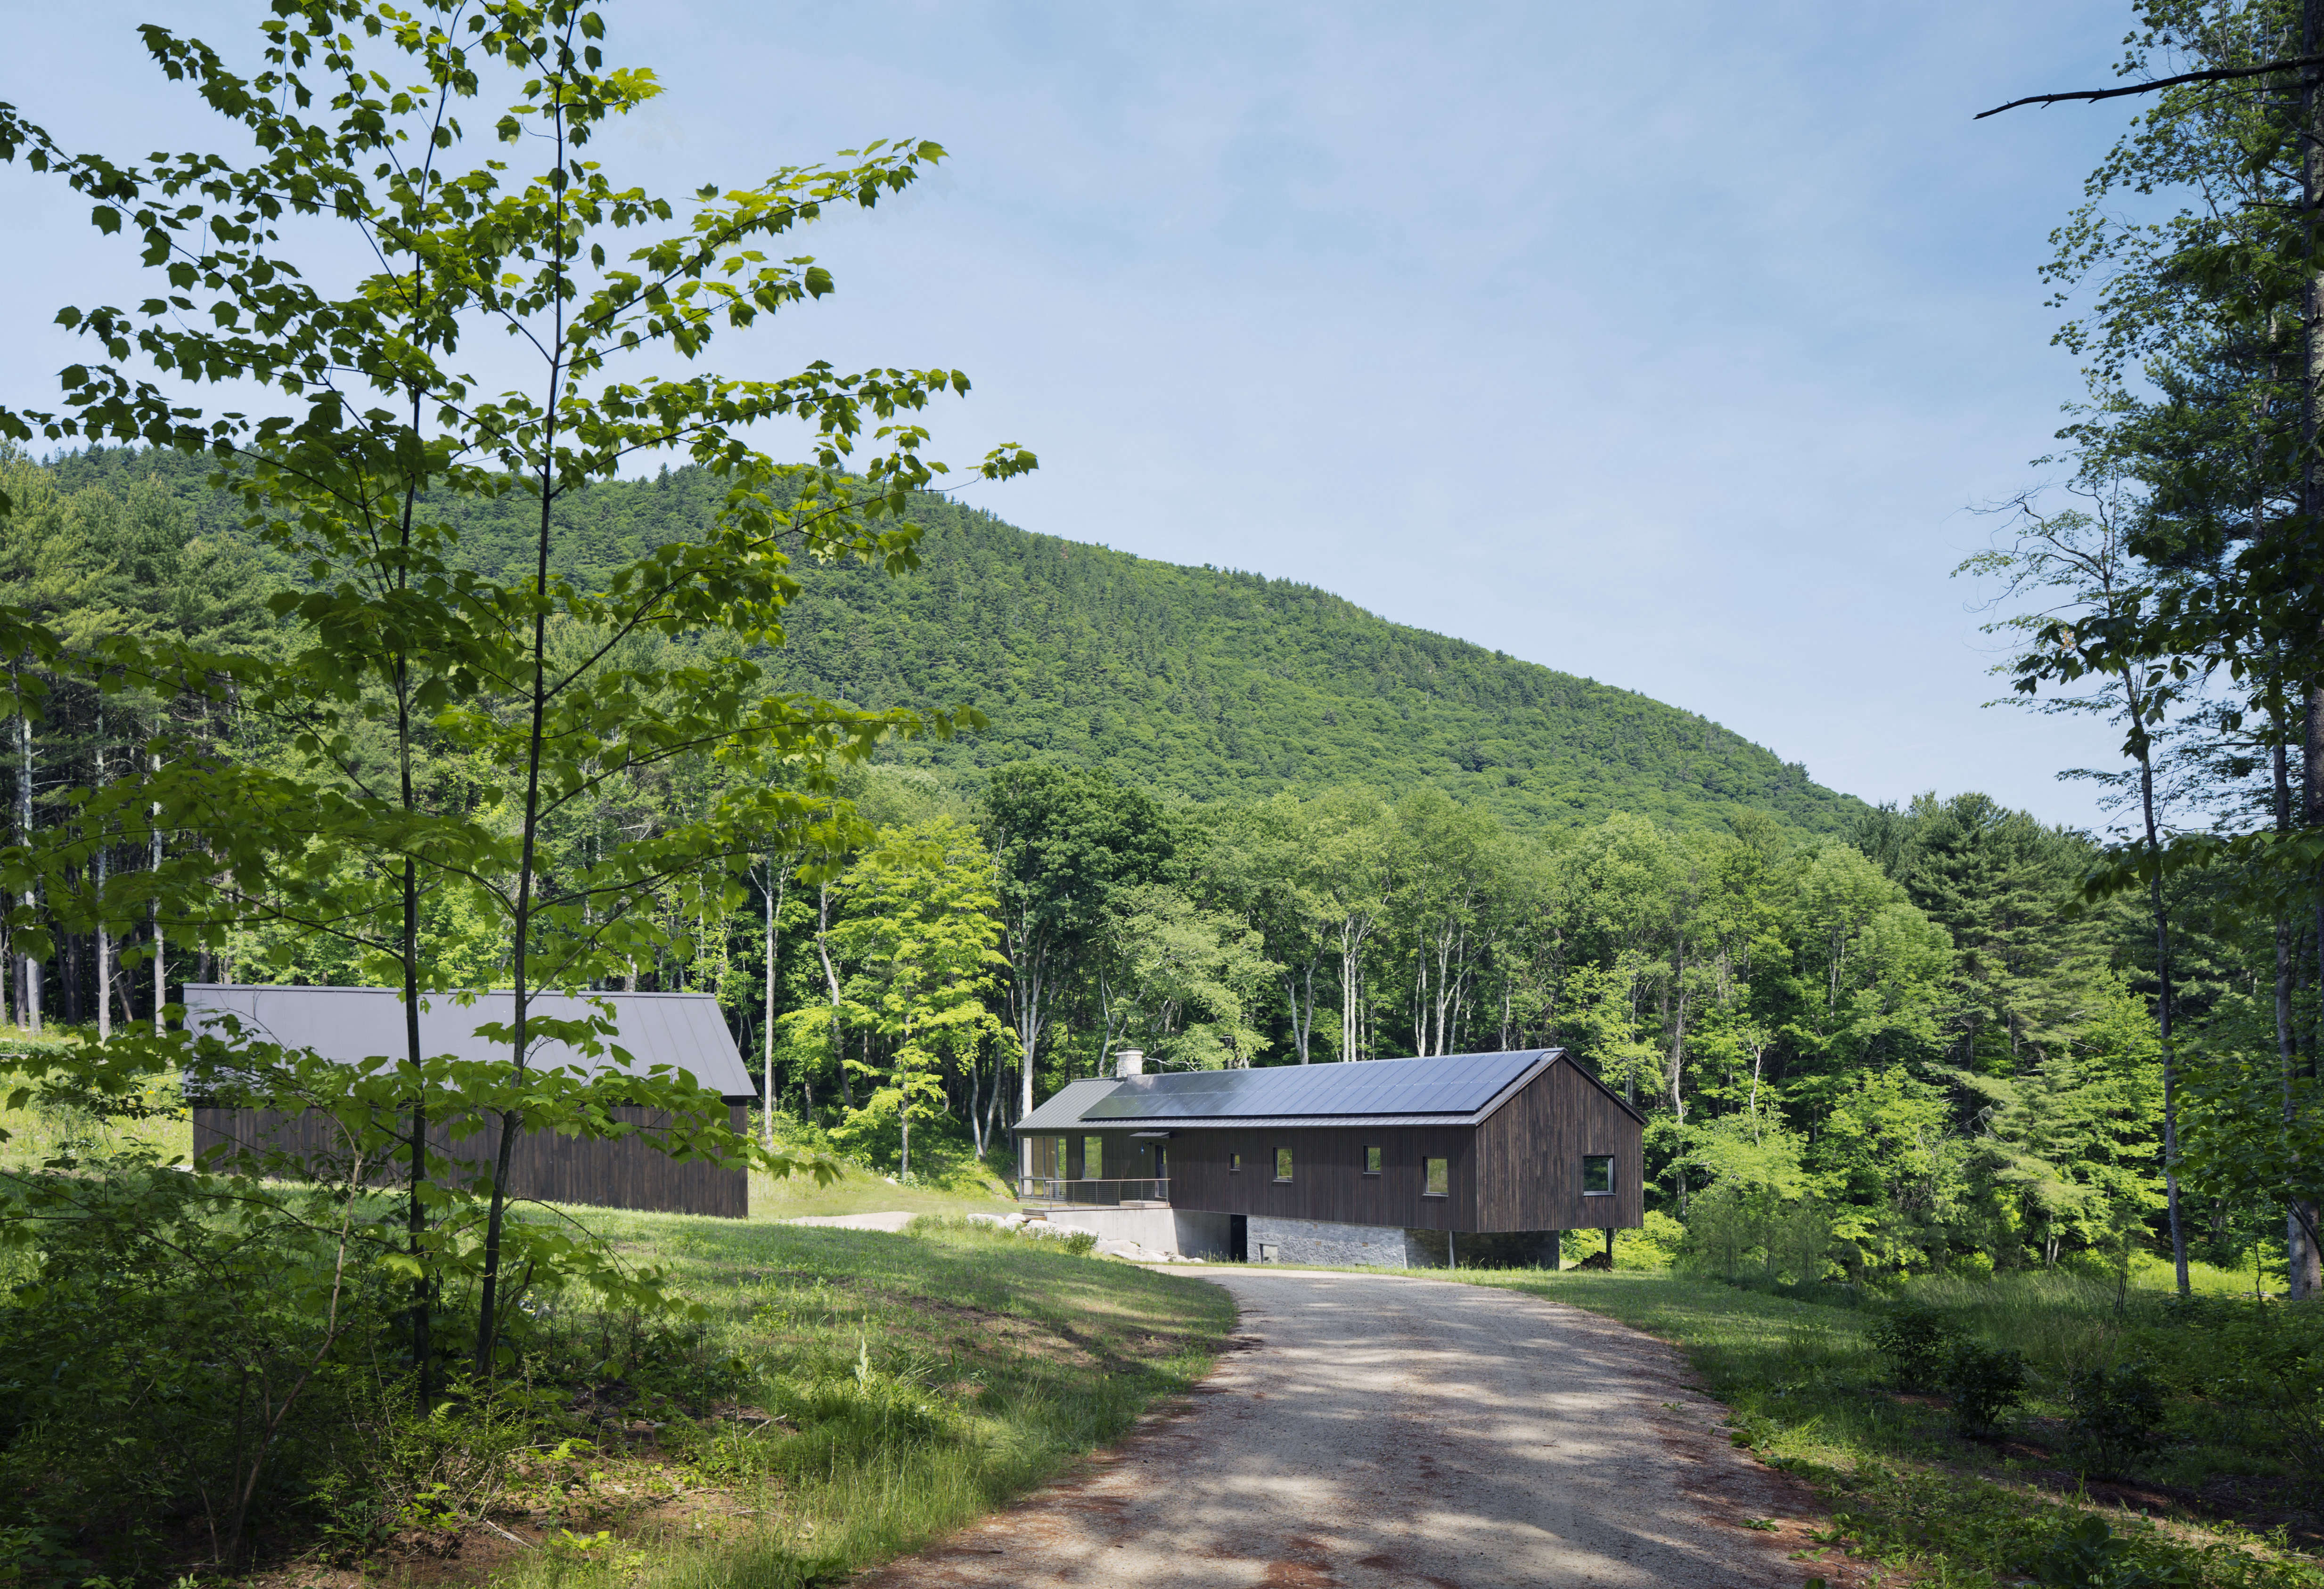 Architect Visit: Aging in Place in the Berkshires, Modern Barn Edition